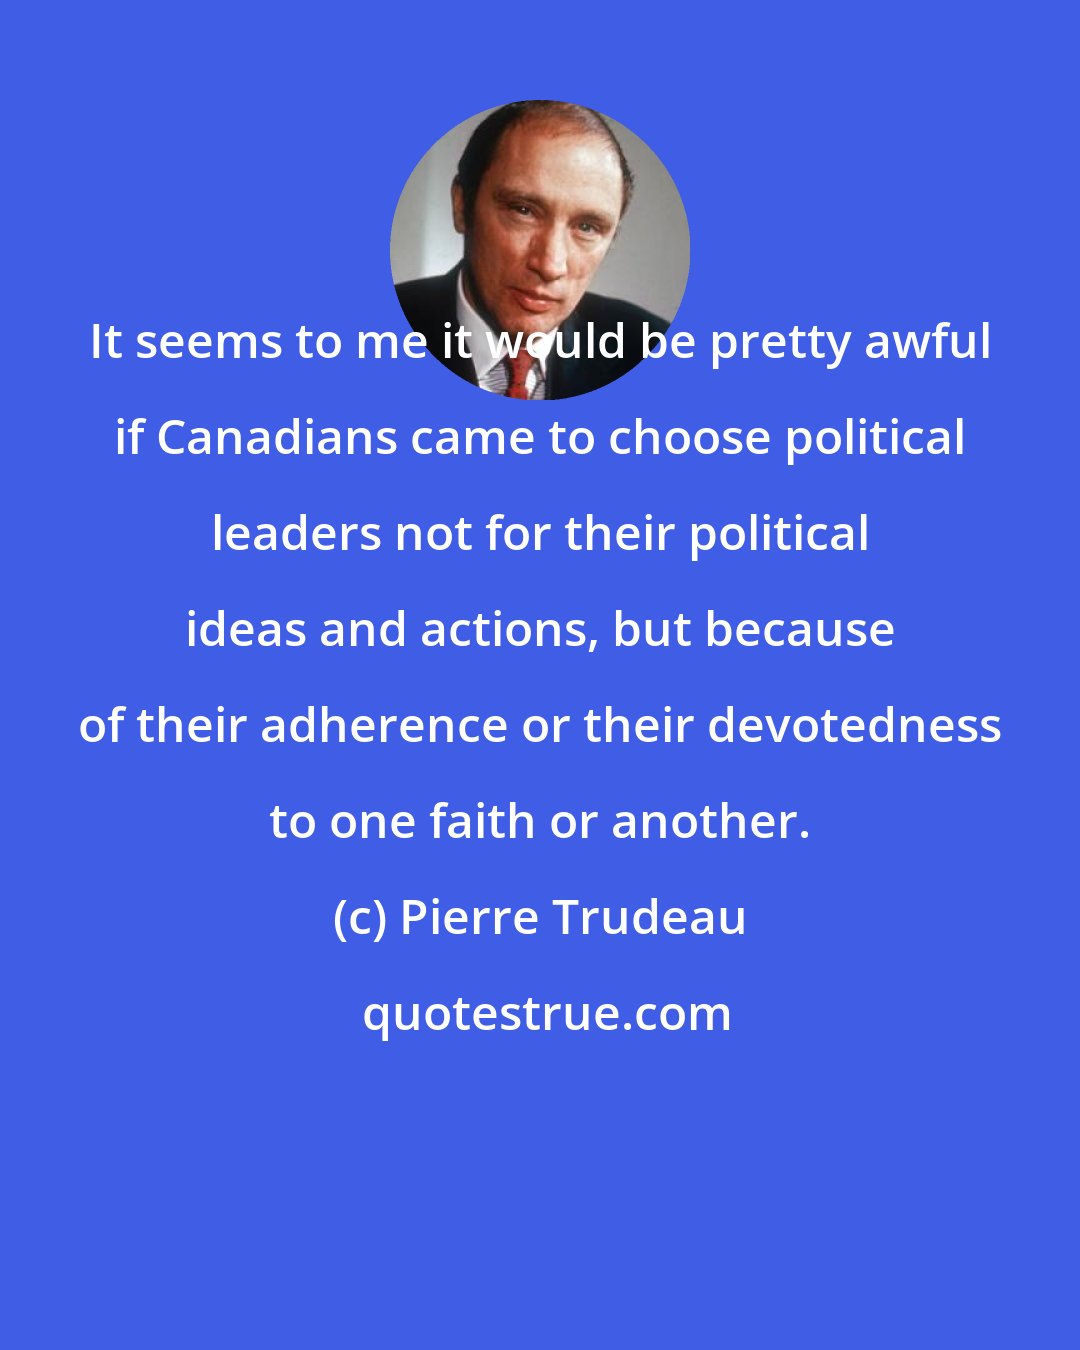 Pierre Trudeau: It seems to me it would be pretty awful if Canadians came to choose political leaders not for their political ideas and actions, but because of their adherence or their devotedness to one faith or another.